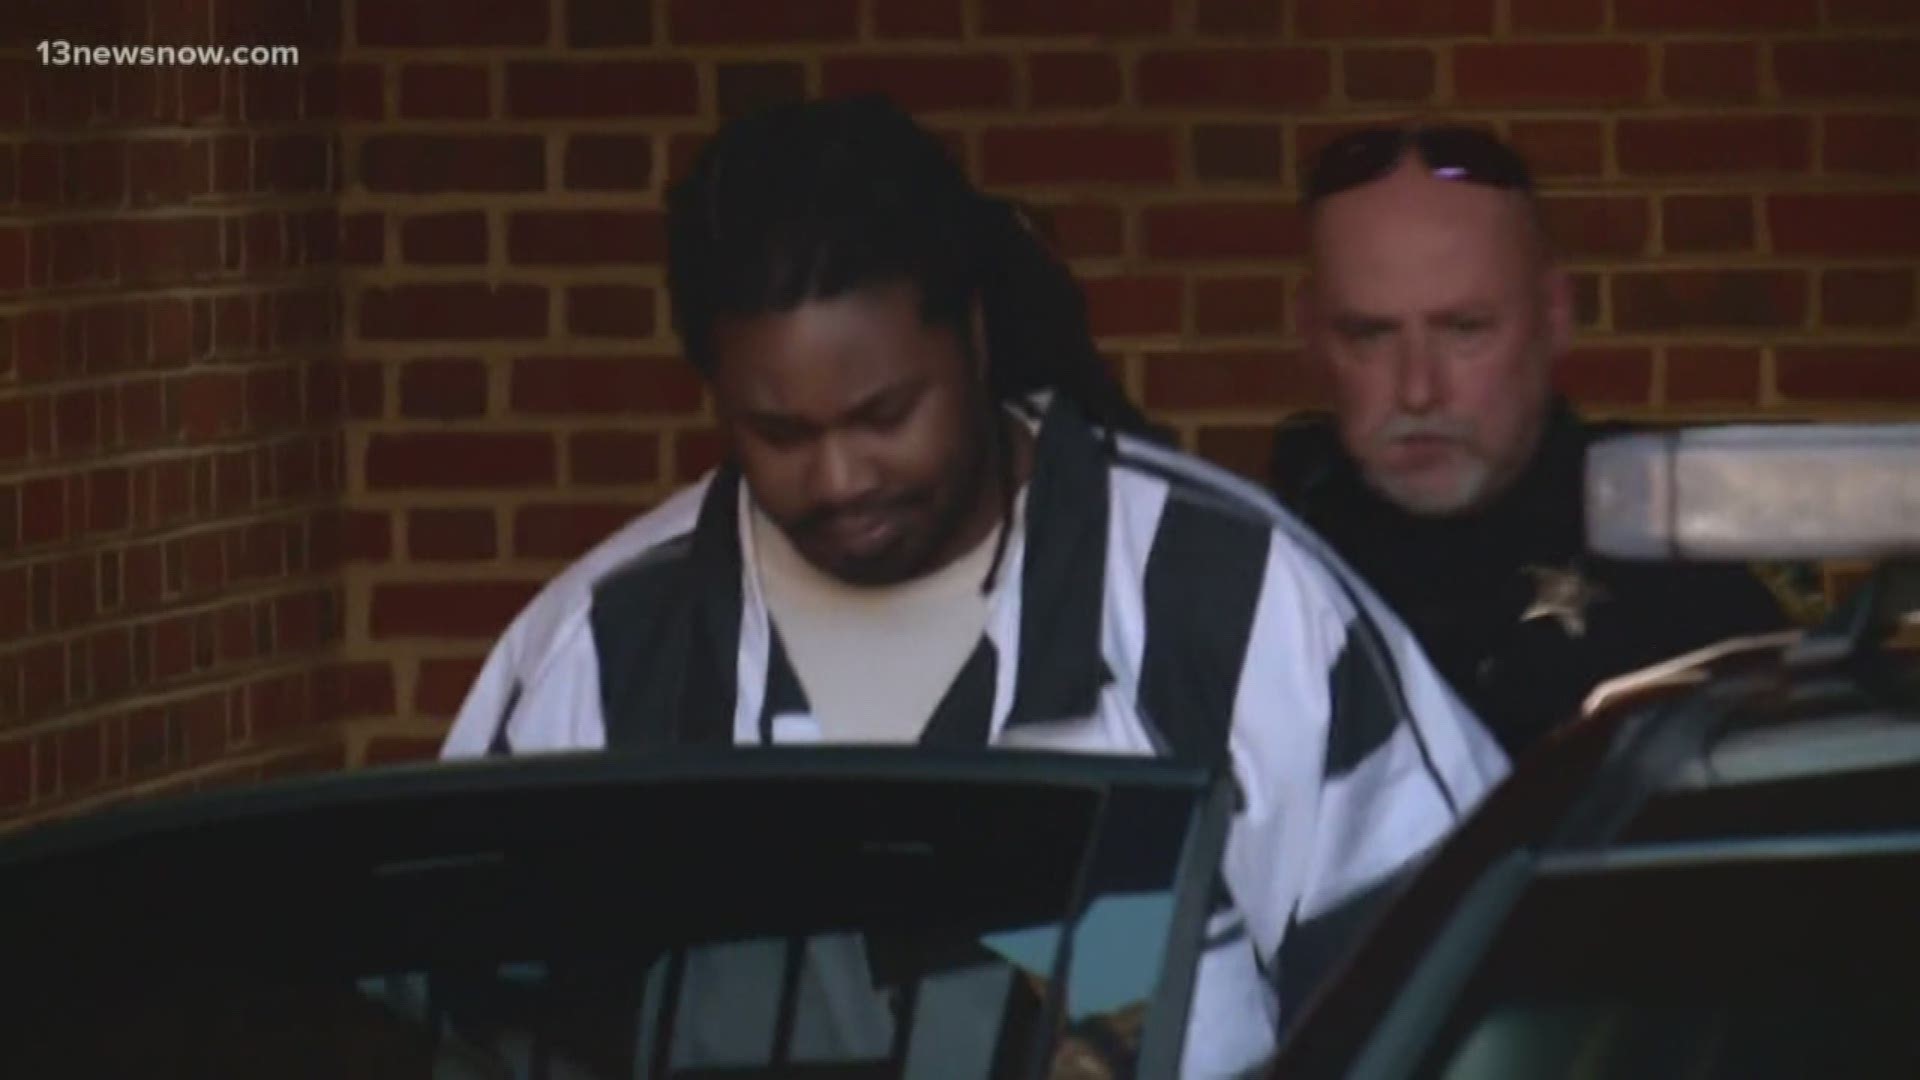 Jesse Matthew pleaded guilty to killing a University of Virginia student and a Virginia Tech student in 2016. He was diagnosed with cancer so he is being moved to a Sussex prison where he can be treated.